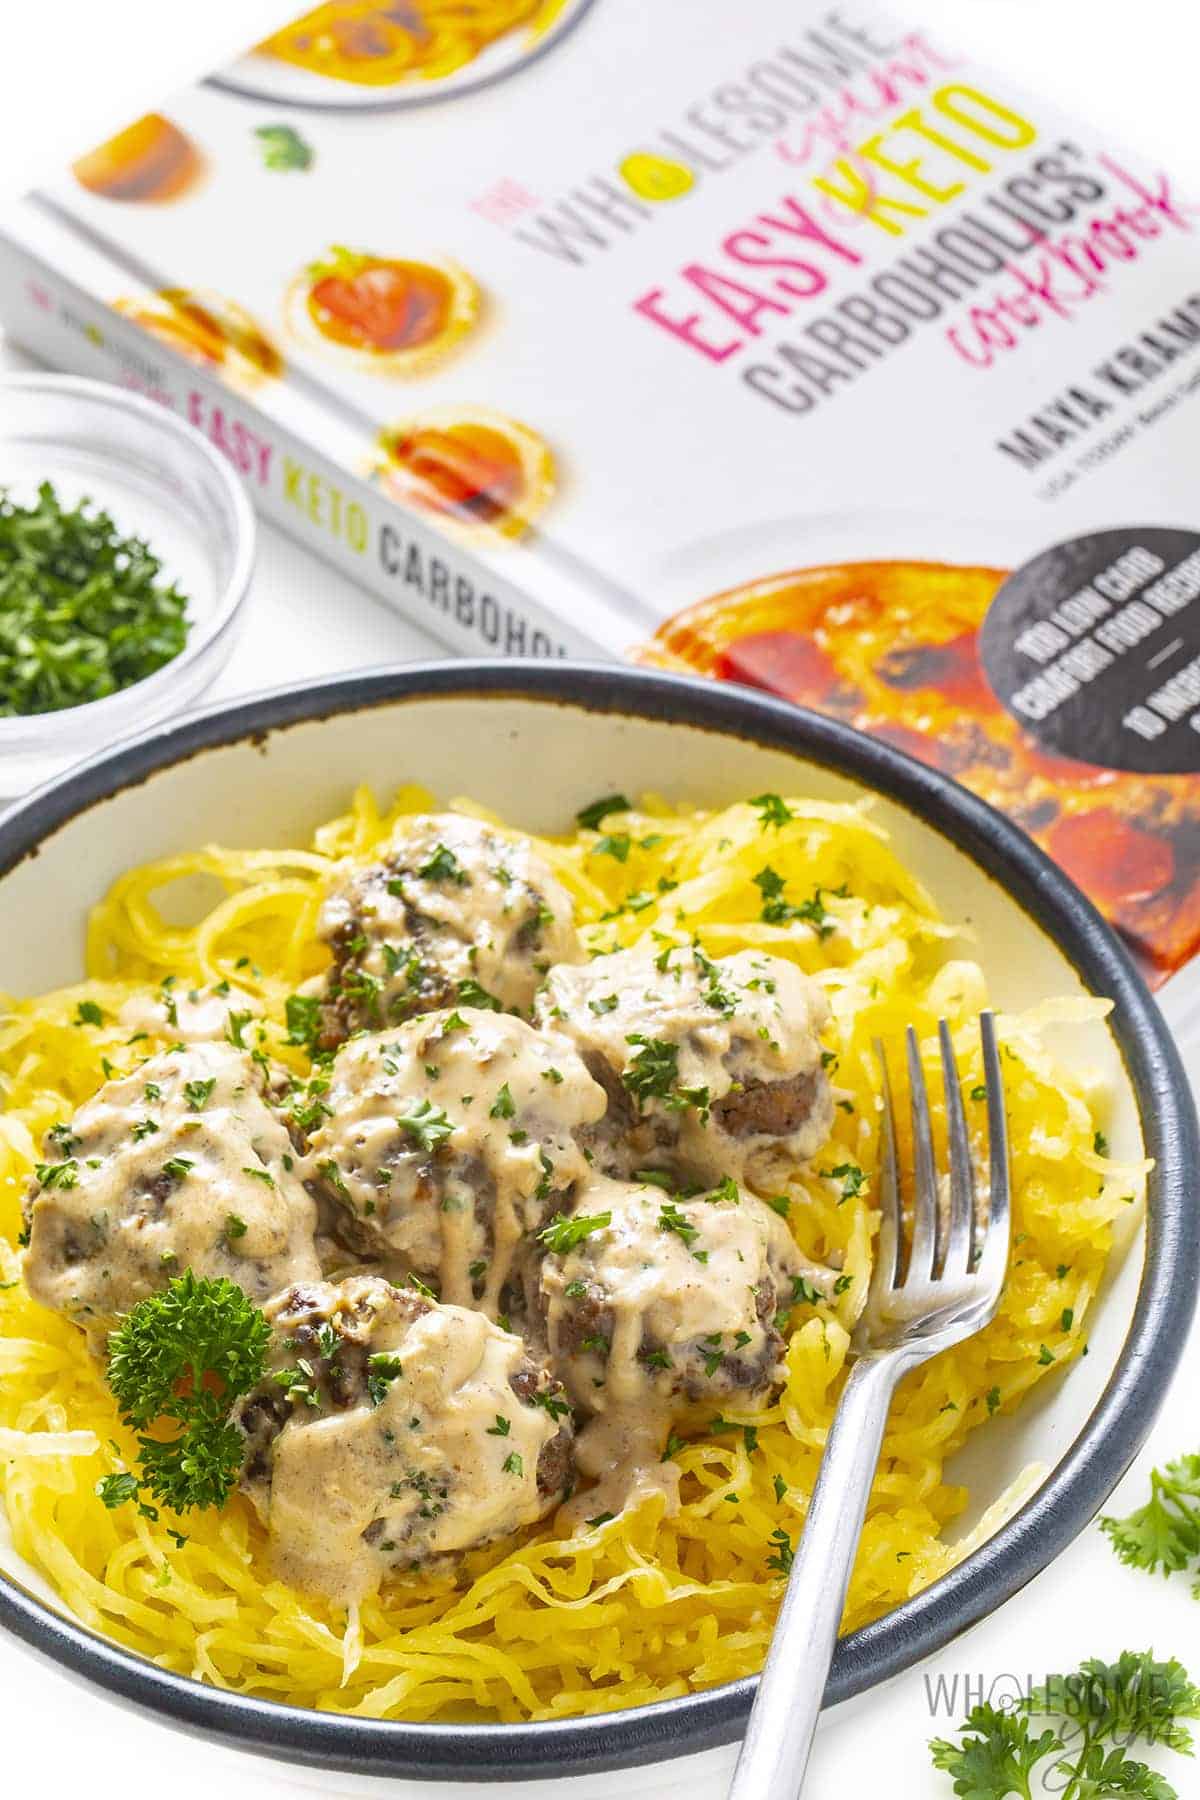 Low carb Swedish meatballs with Easy Keto Carboholics' Cookbook.